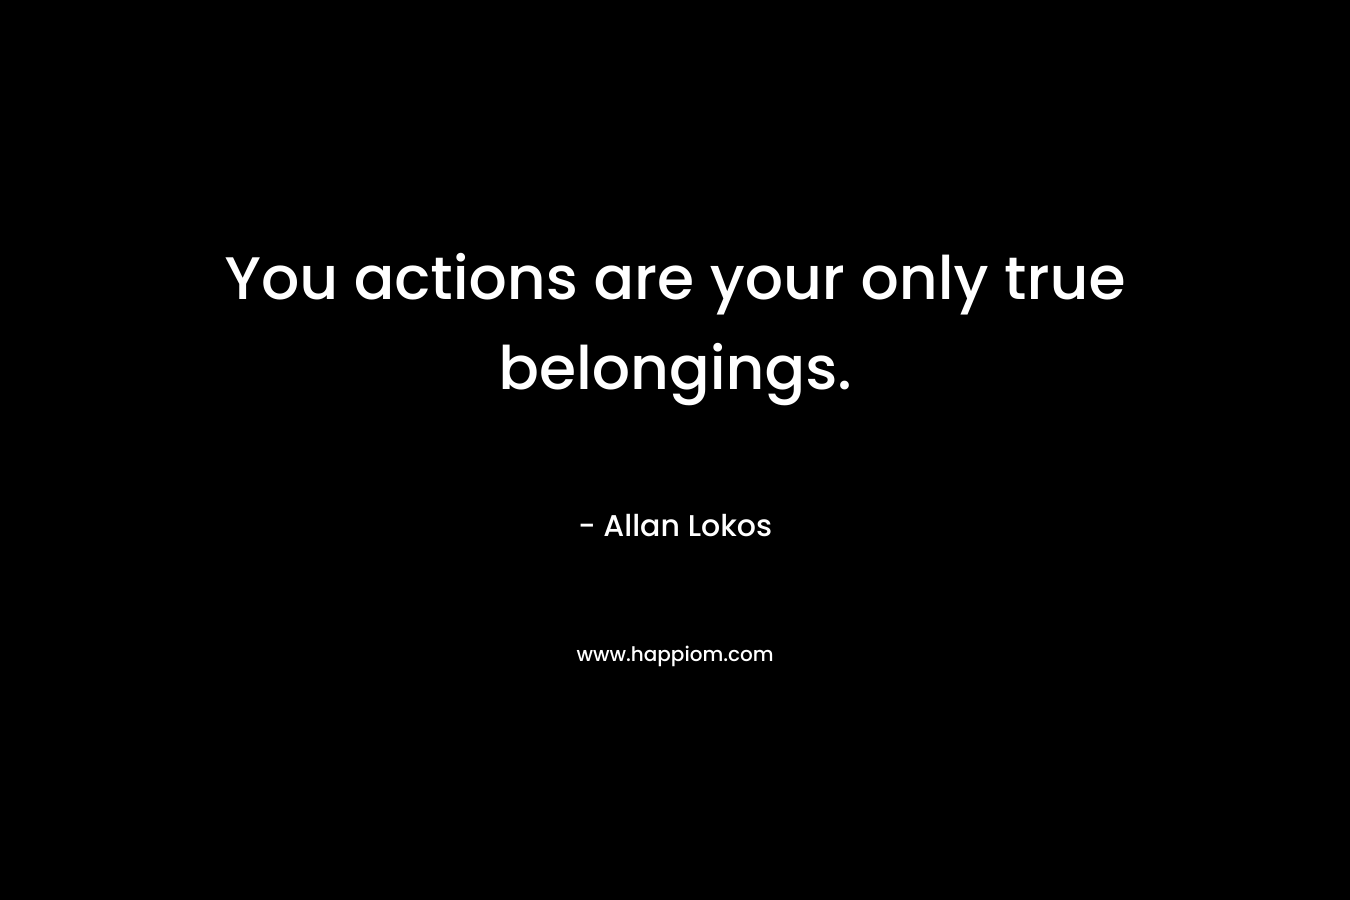 You actions are your only true belongings.